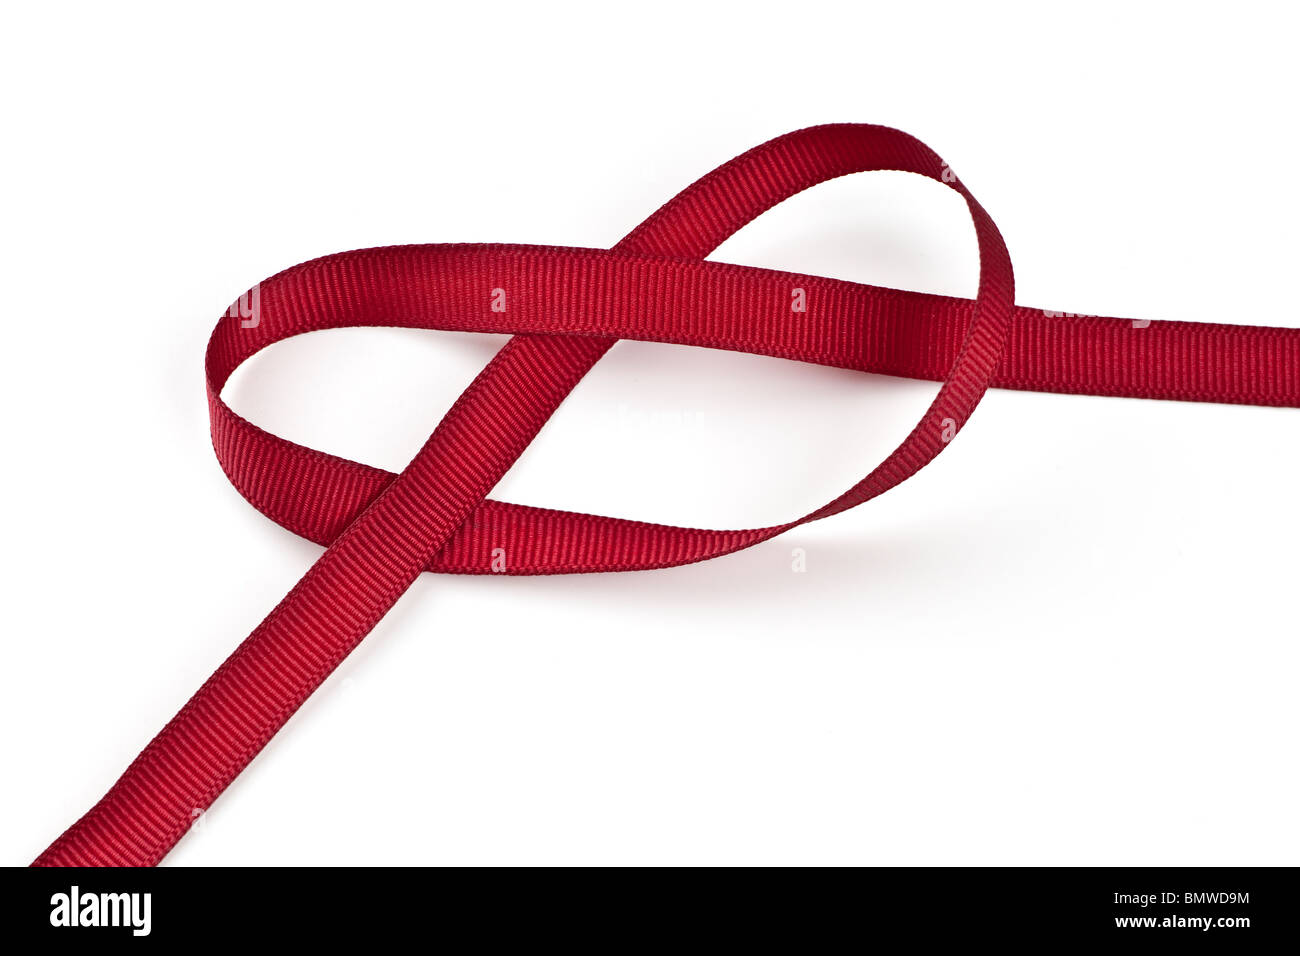 Red ribbon knotted in the shape of a heart Stock Photo